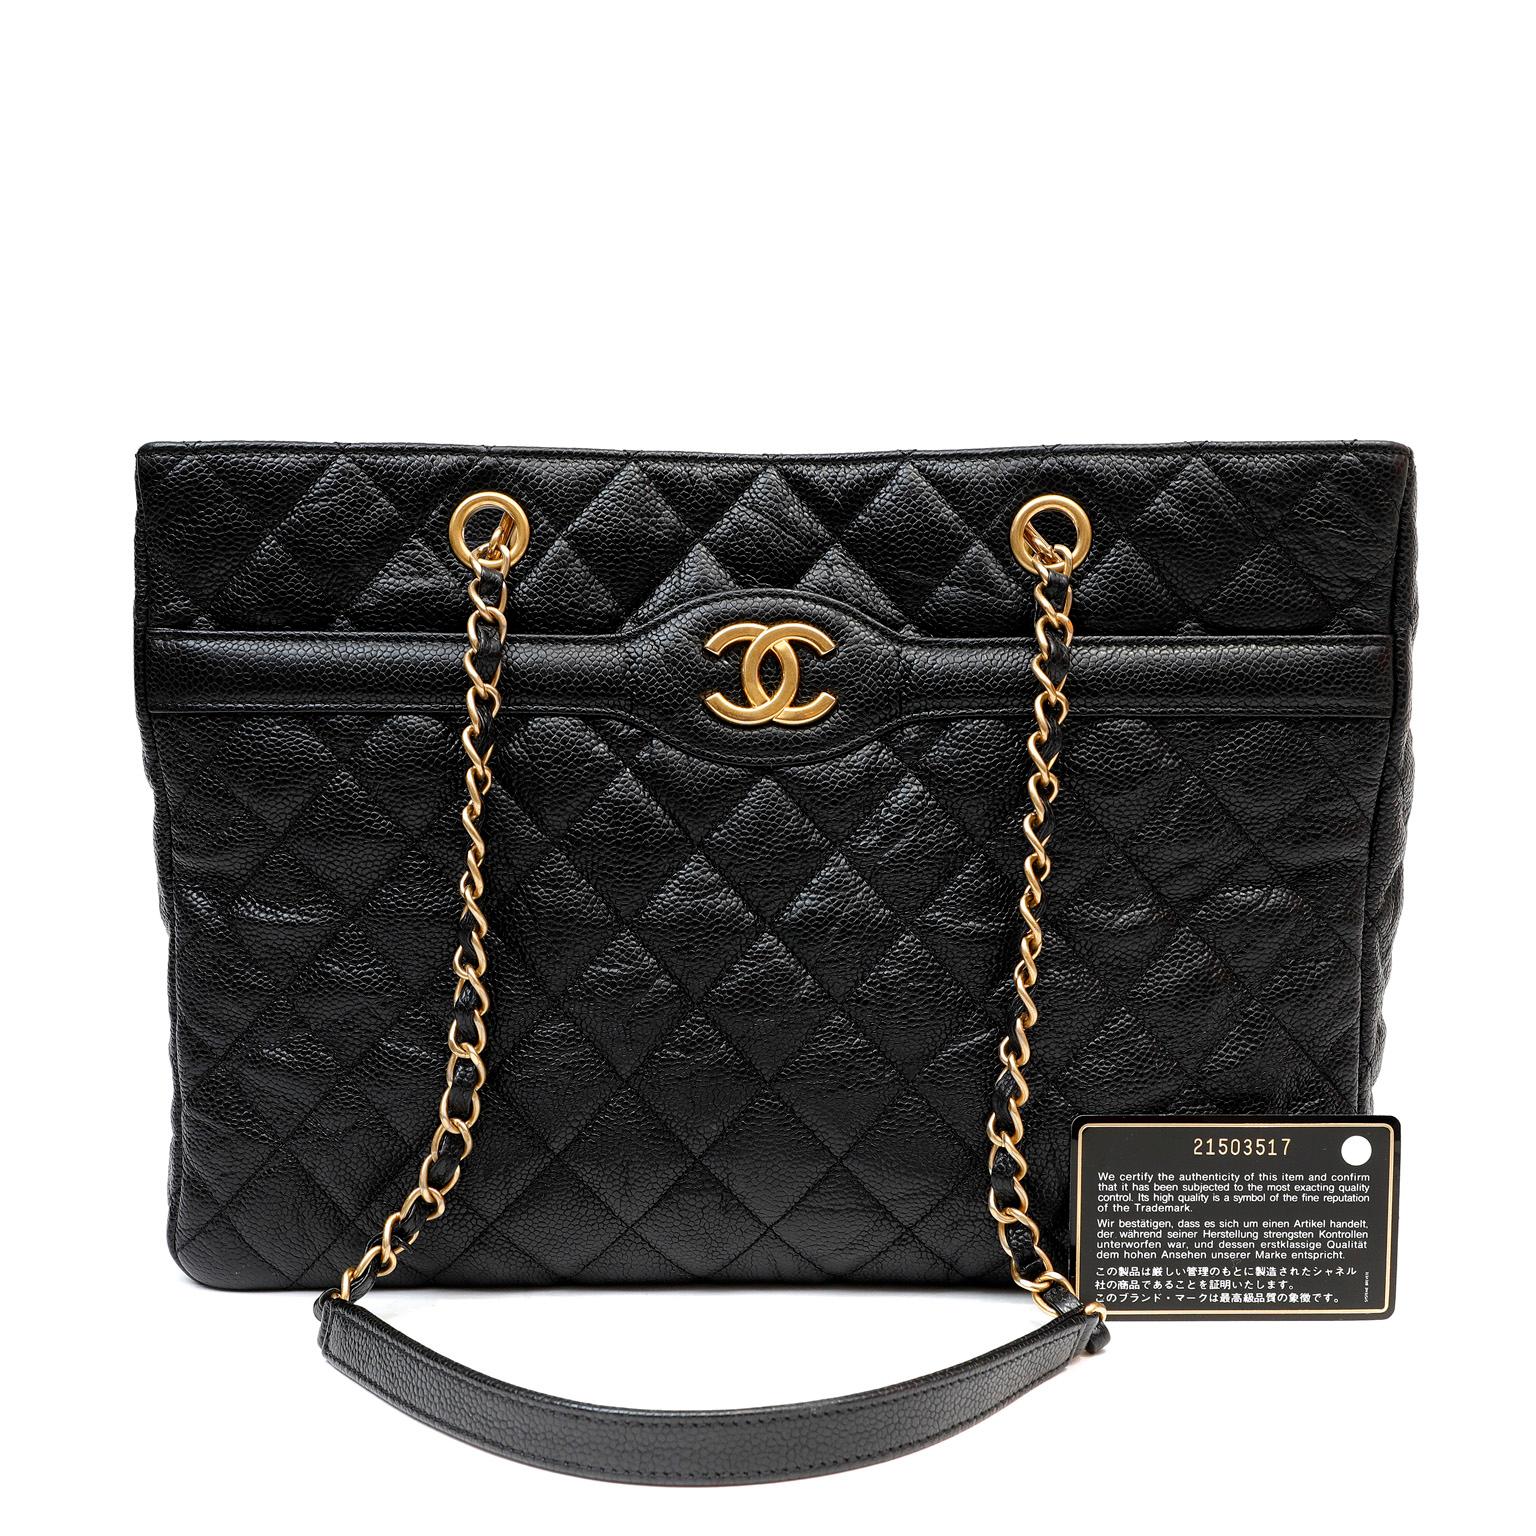 Chanel Black Caviar Leather Tote  For Sale 1